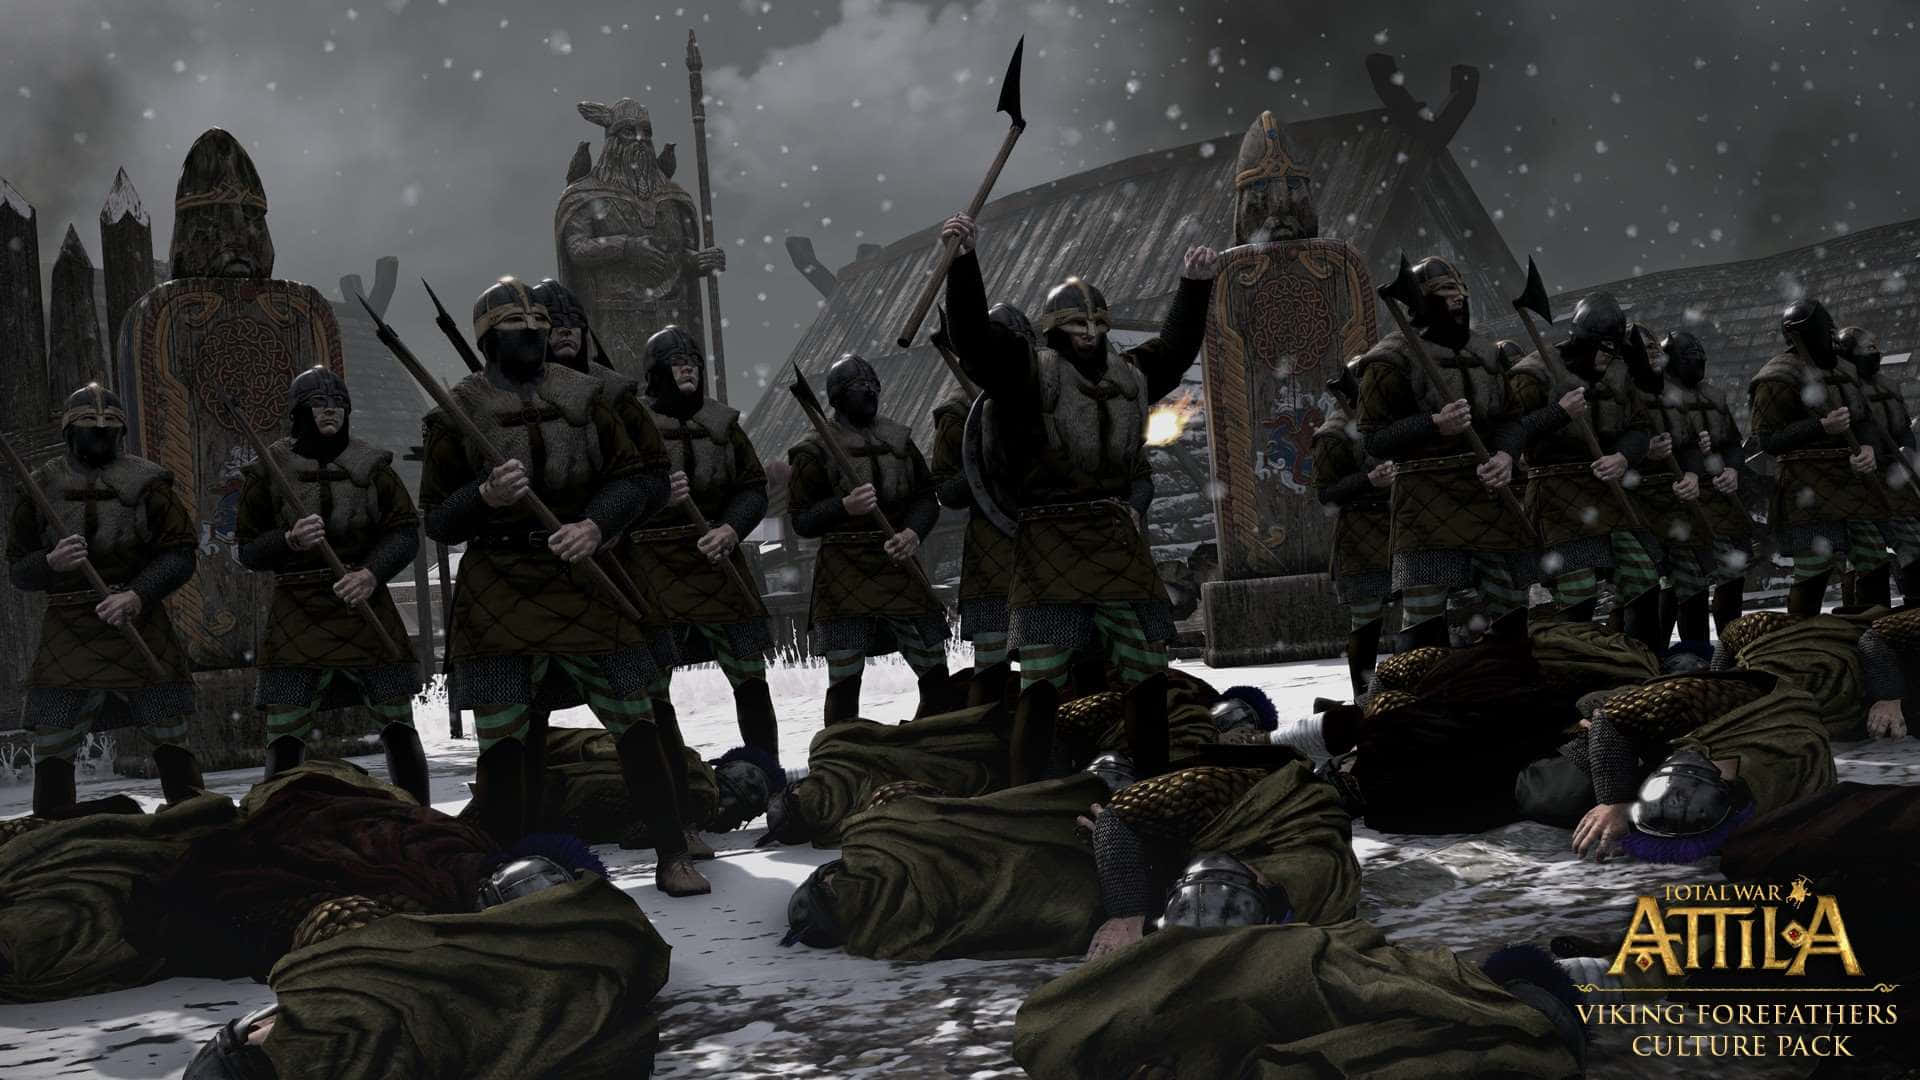 Relive the Spectacular Battles of the Total War: Attila Video Game